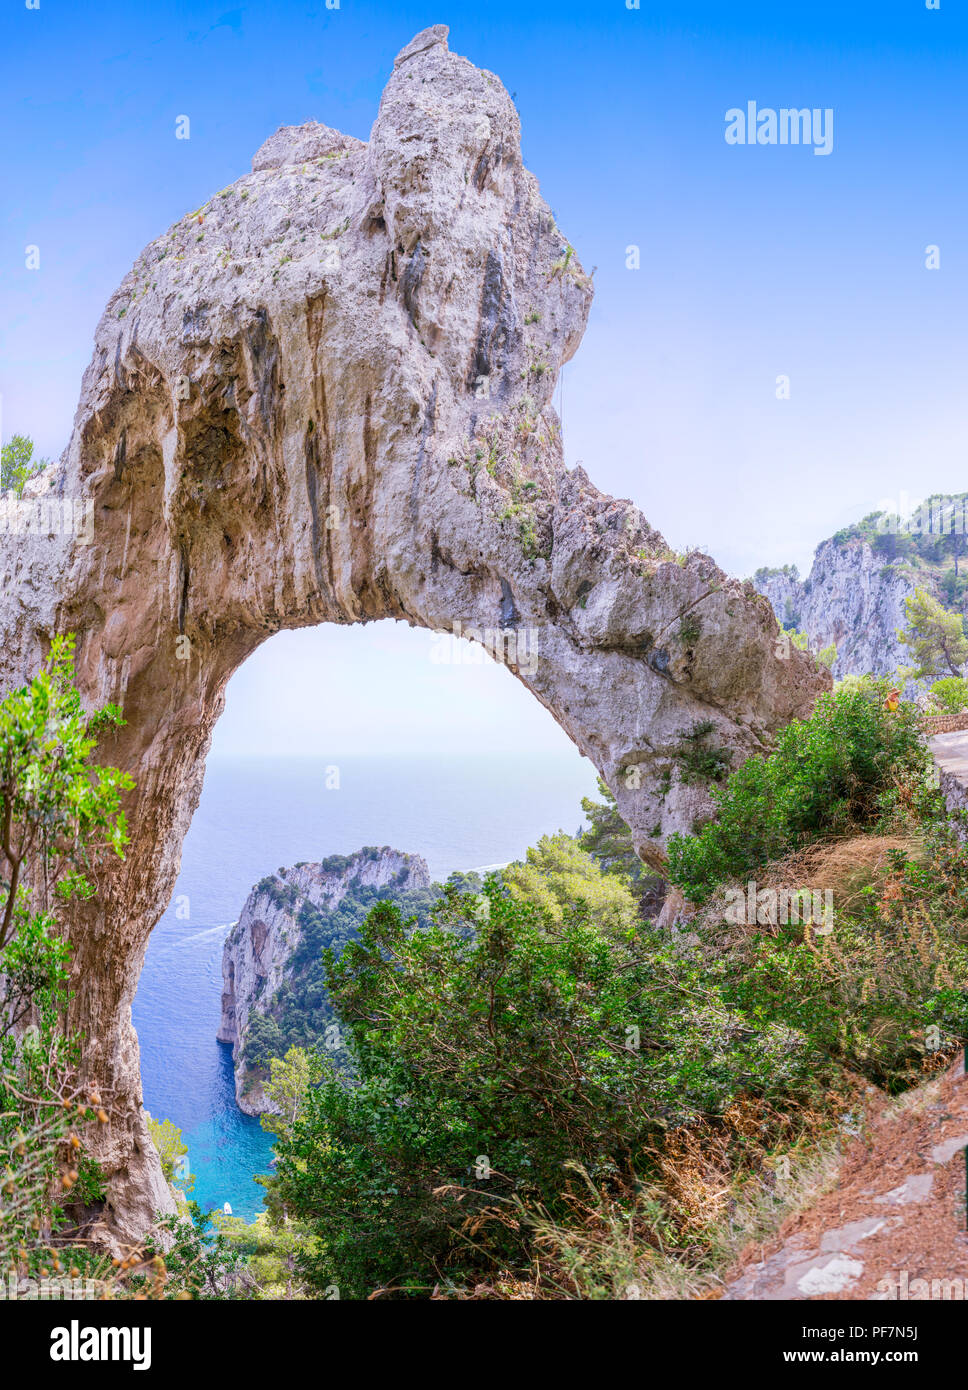 https://c8.alamy.com/comp/PF7N5J/the-arco-naturale-arch-natural-on-capri-italy-as-viewed-from-nearby-viewing-area-PF7N5J.jpg